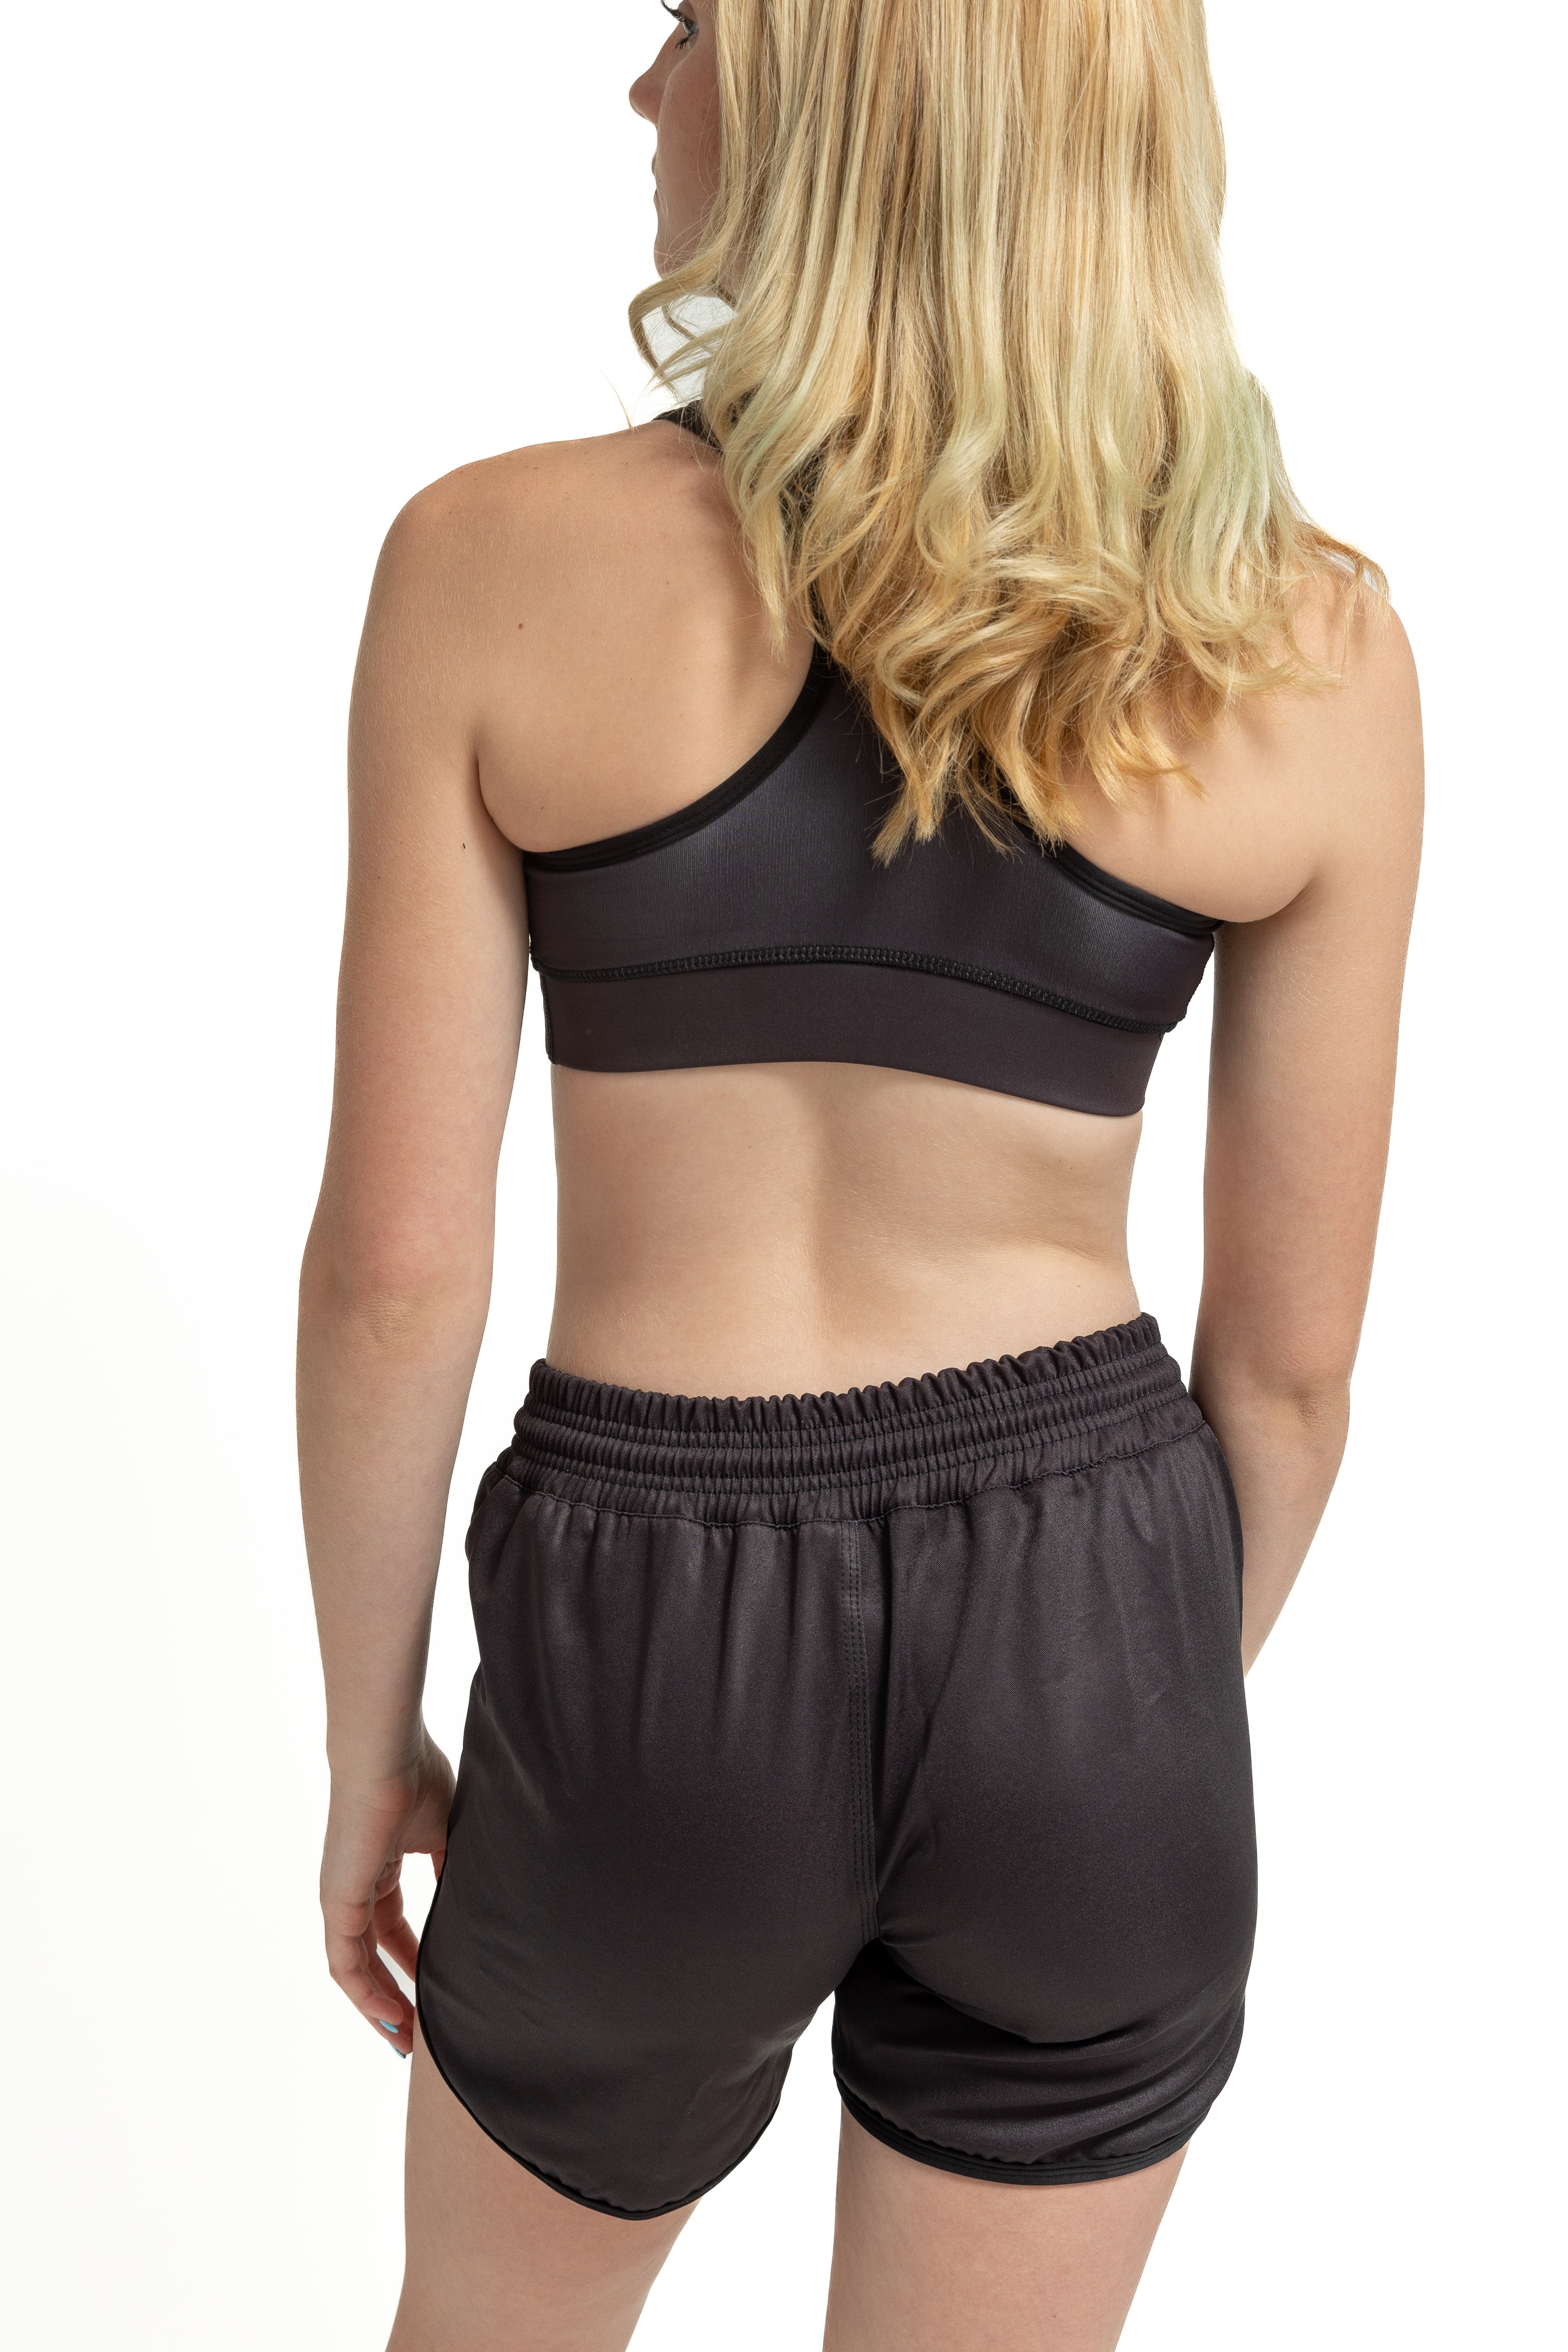 Girl modeling high-compression sports bra and black athletic shorts